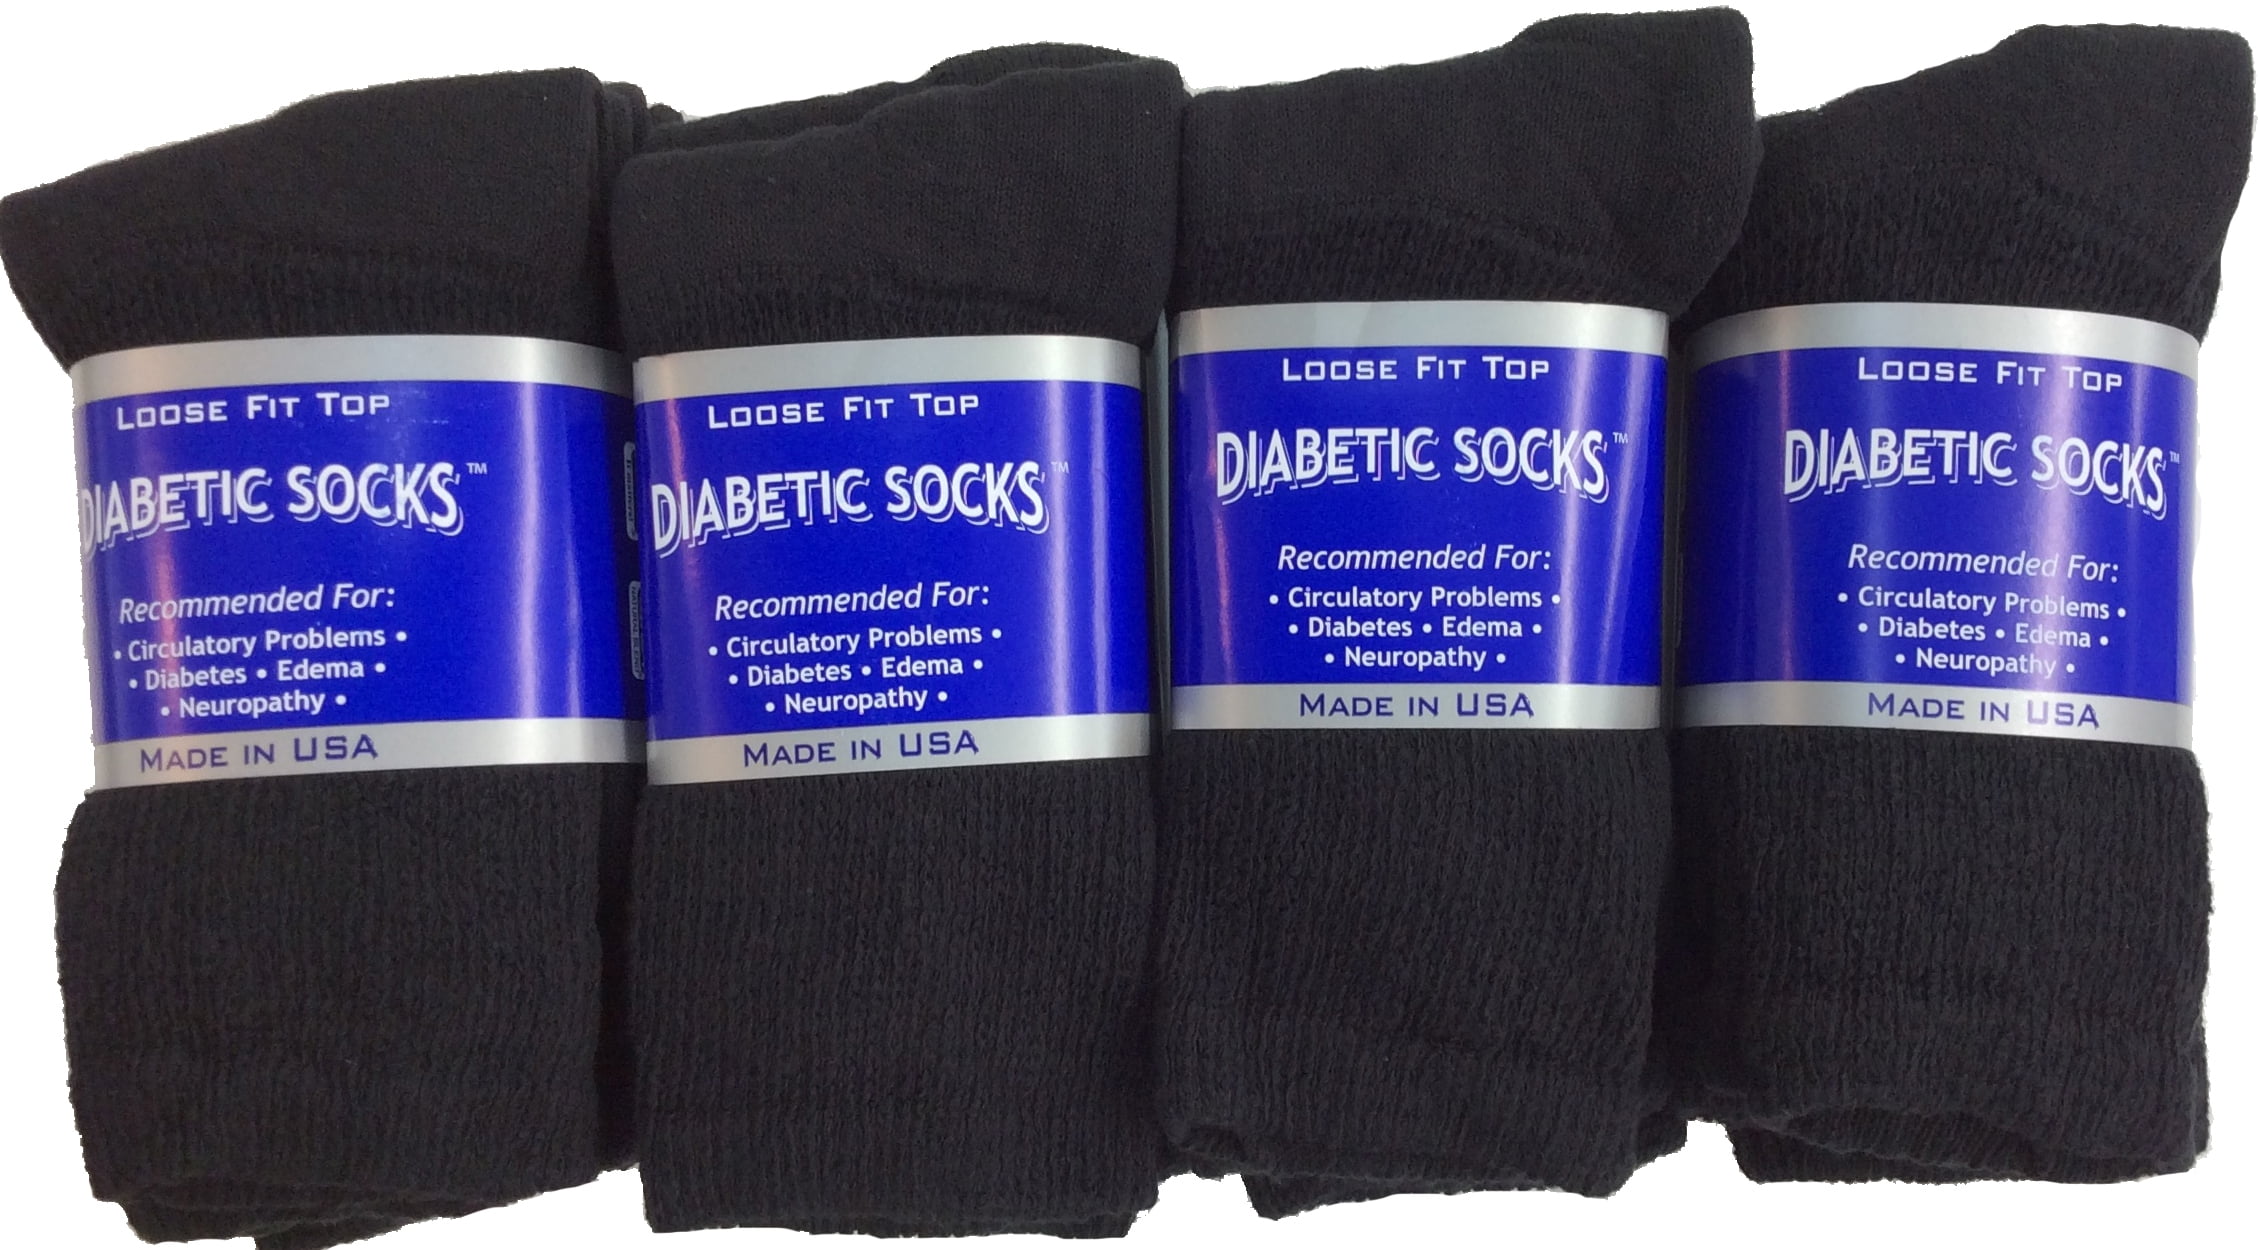 Creswell 18 Pairs Of Mens Black Diabetic Crew Socks 10-13 Size Made in ...